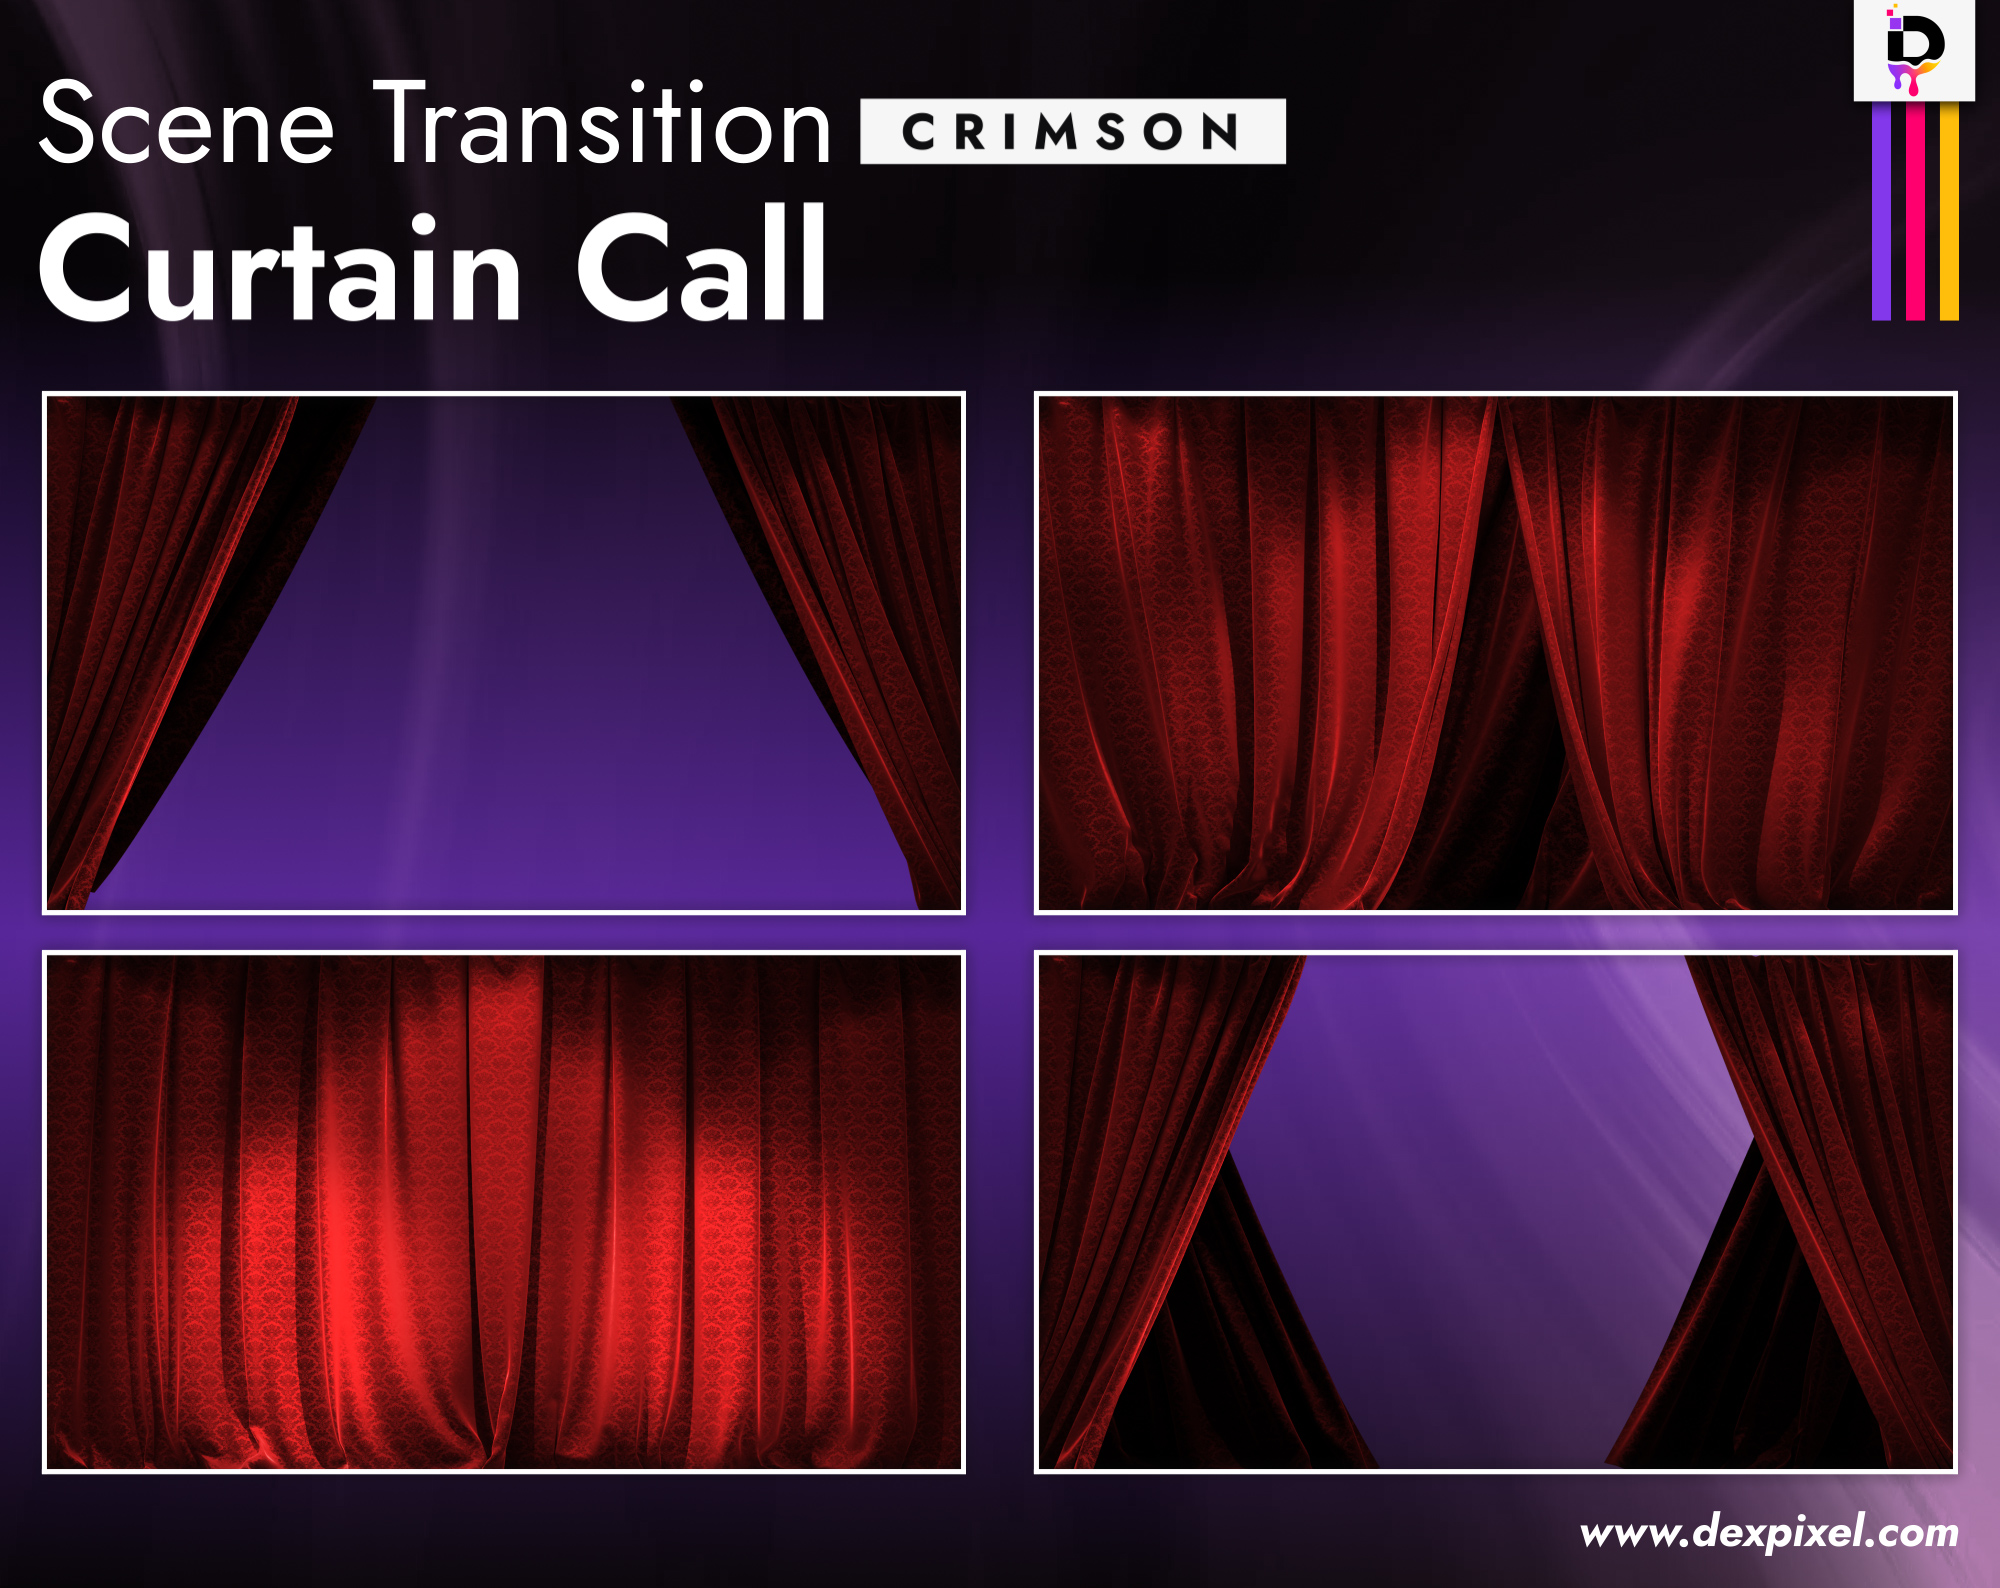 Curtain Reveal Transition Is A High-Quality Theater Curtain Transition That Will Make Your Presentation More Professional And Engaging. It'S The Perfect Way To Start Your Next Presentation With A Theatrical Touch. It'S A Great Way To Bring Some Life To Your Stage And Make Your Transitions More Dynamic.